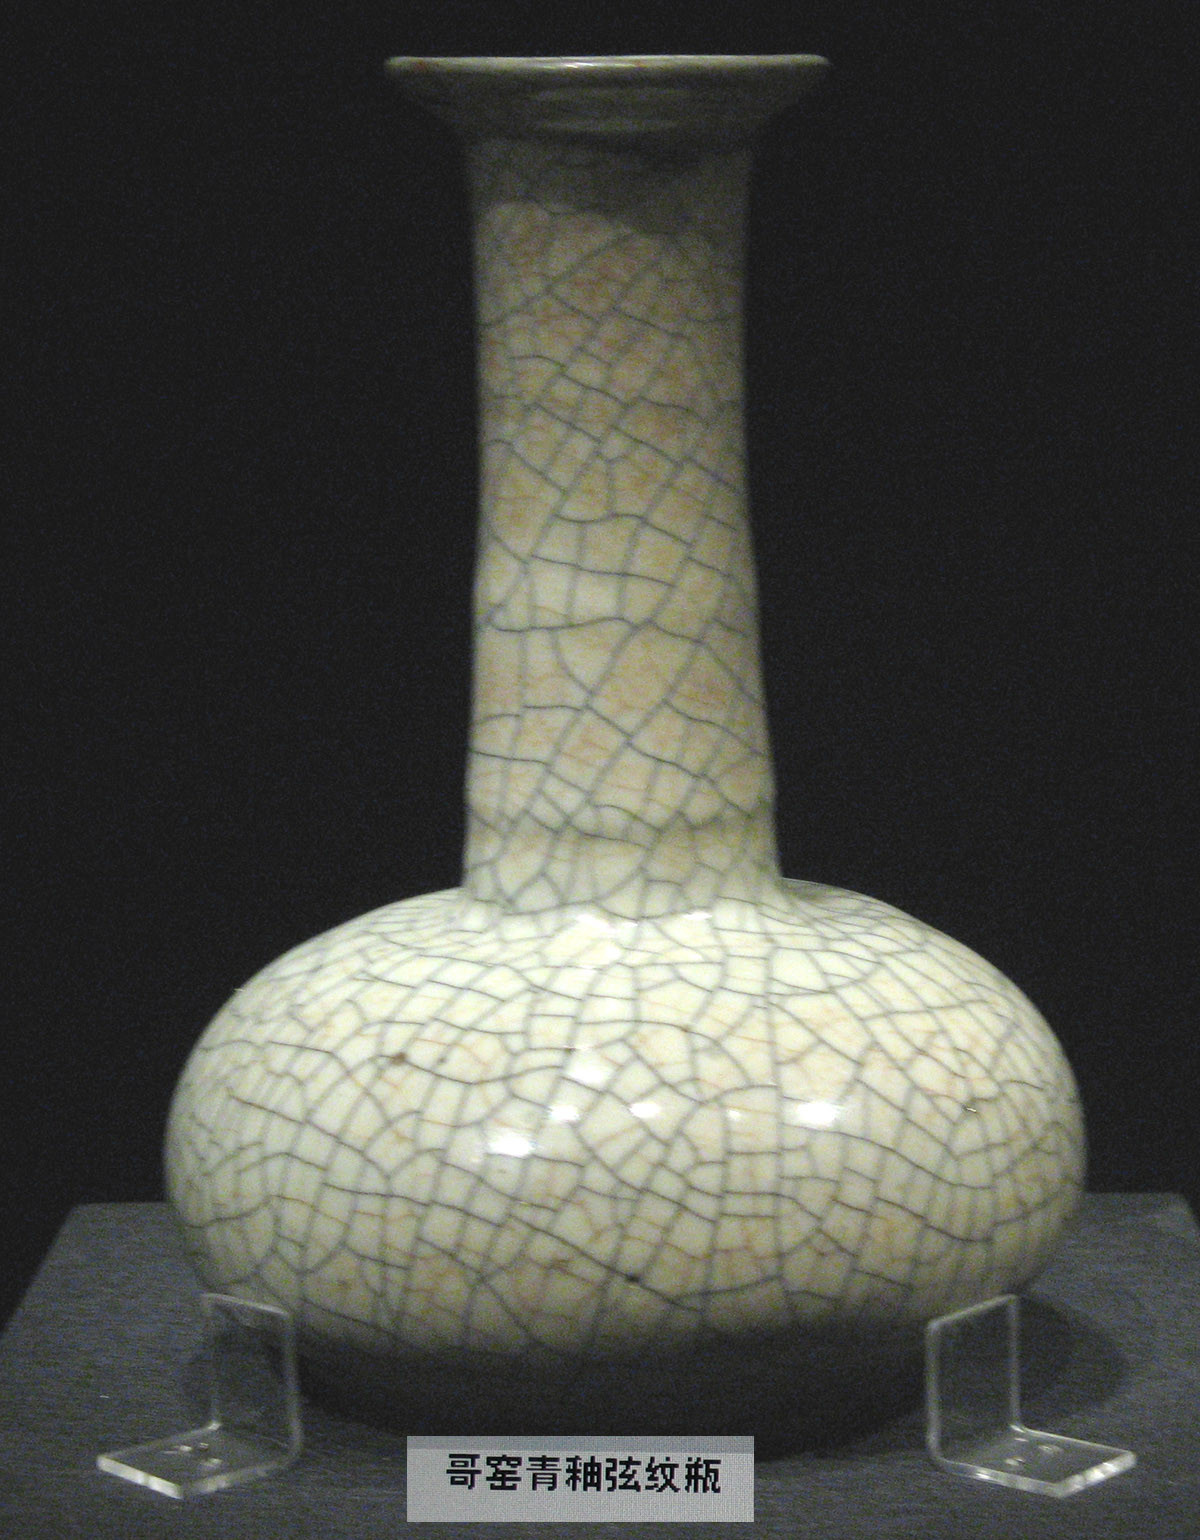 24 Famous song Dynasty Vase 2024 free download song dynasty vase of guan ware southern song dynasty british museum by via with regard to g21 jpg